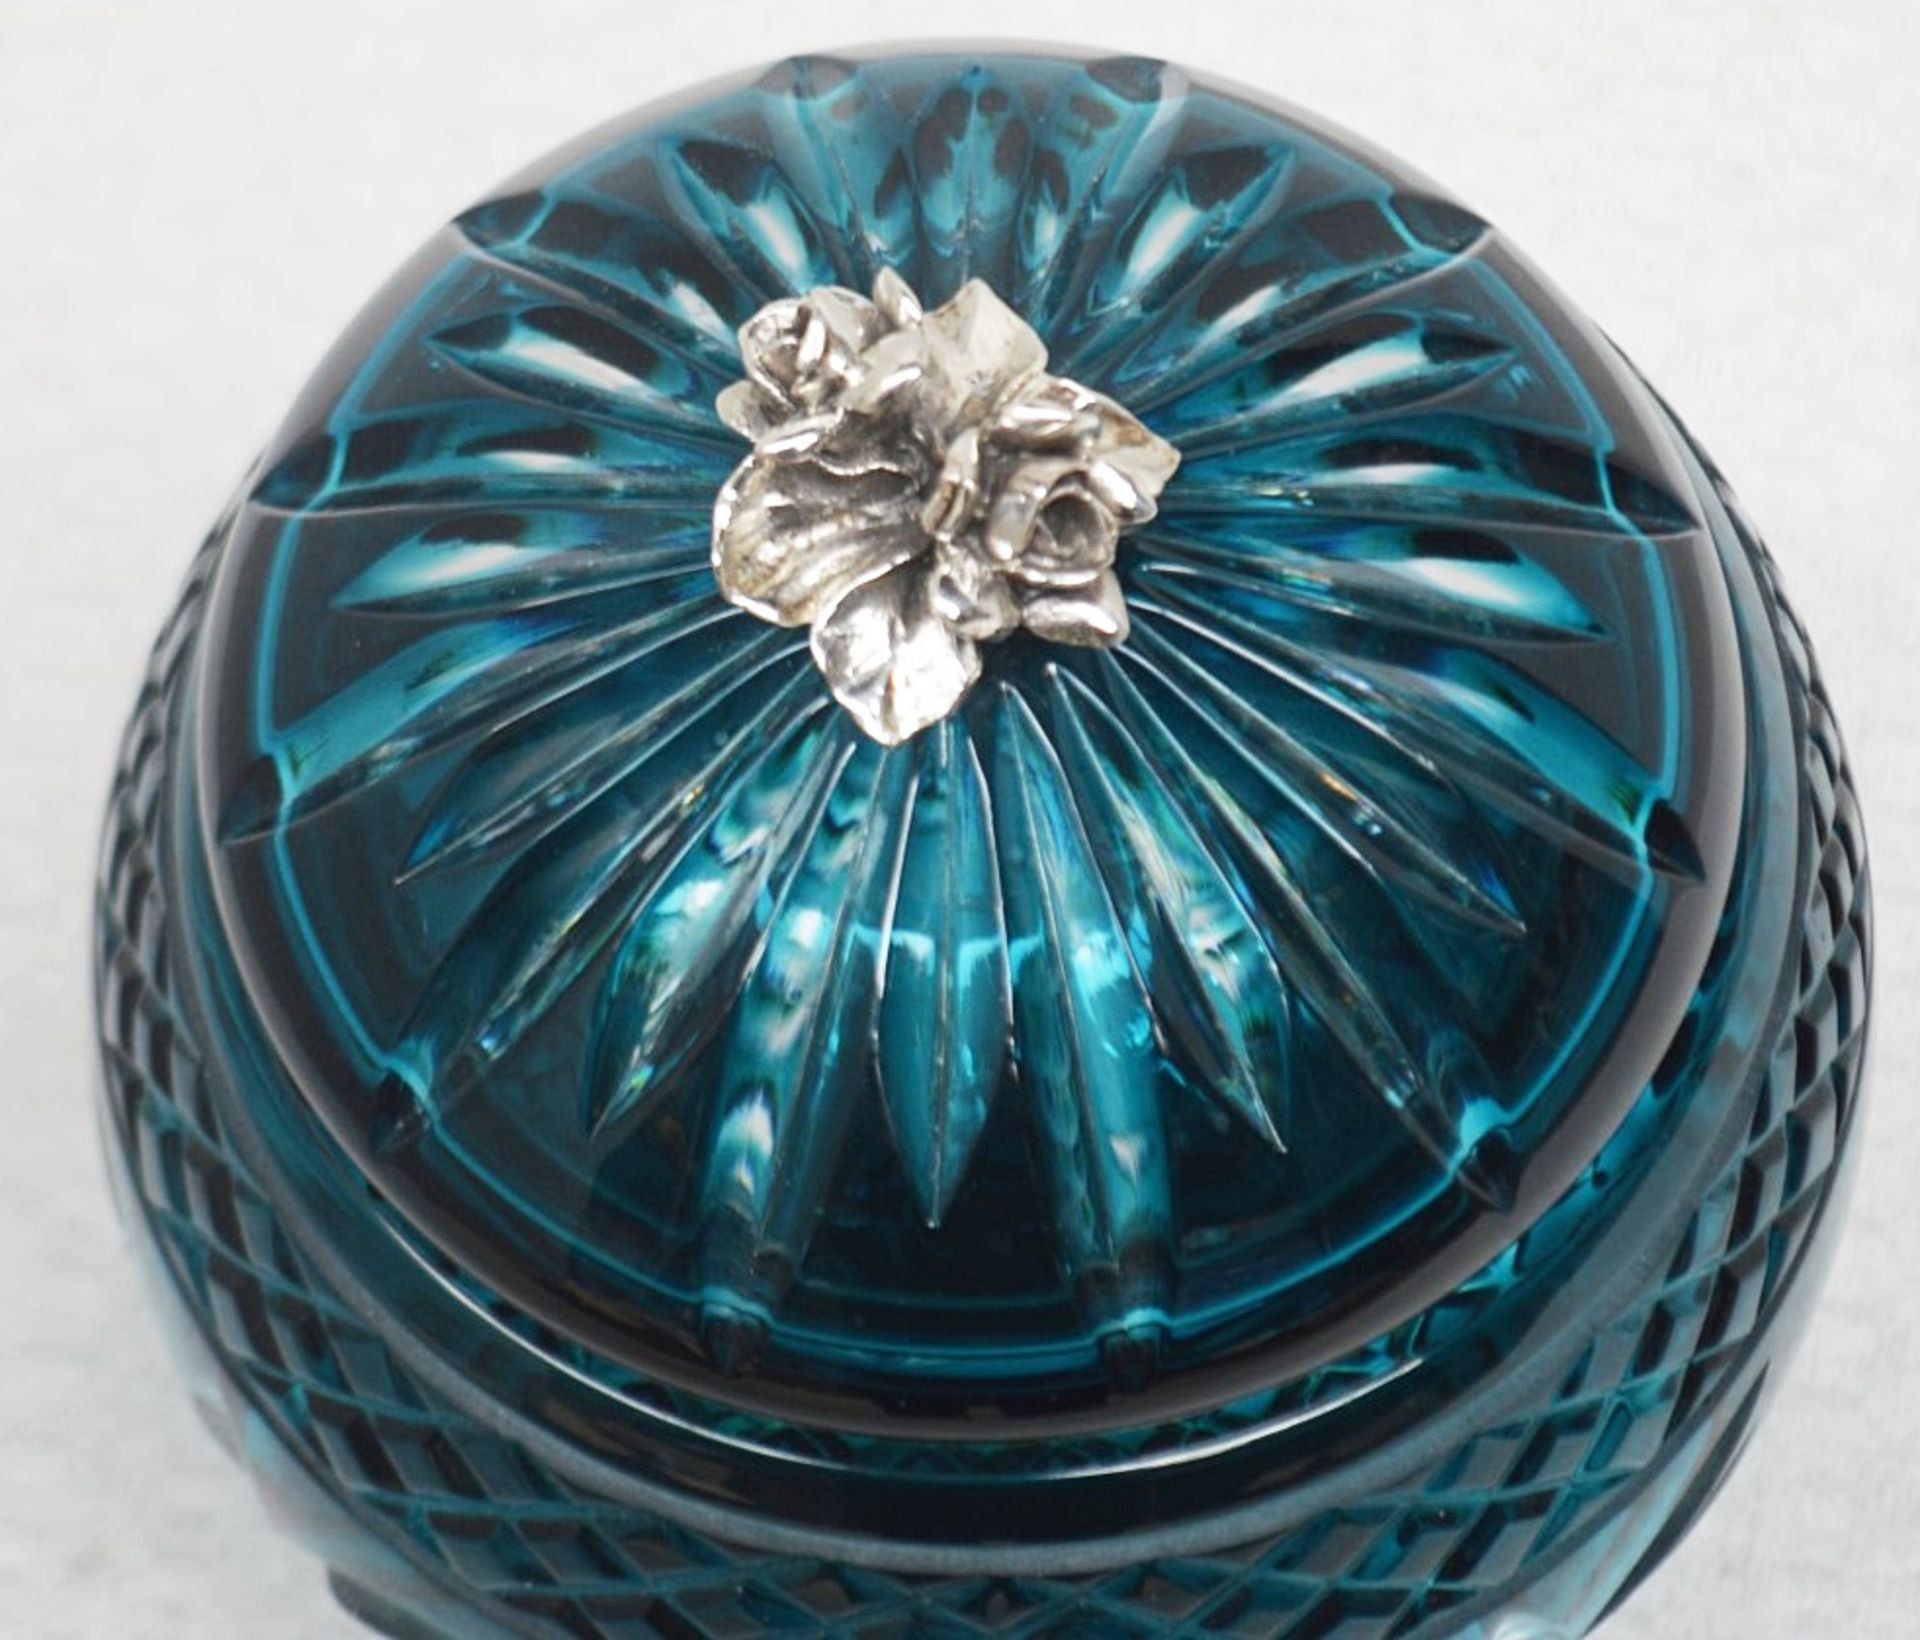 1 x BALDI 'Home Jewels' Italian Hand-crafted Artisan Crystal Coccinella Box In Turquoise - RRP £900 - Image 3 of 5